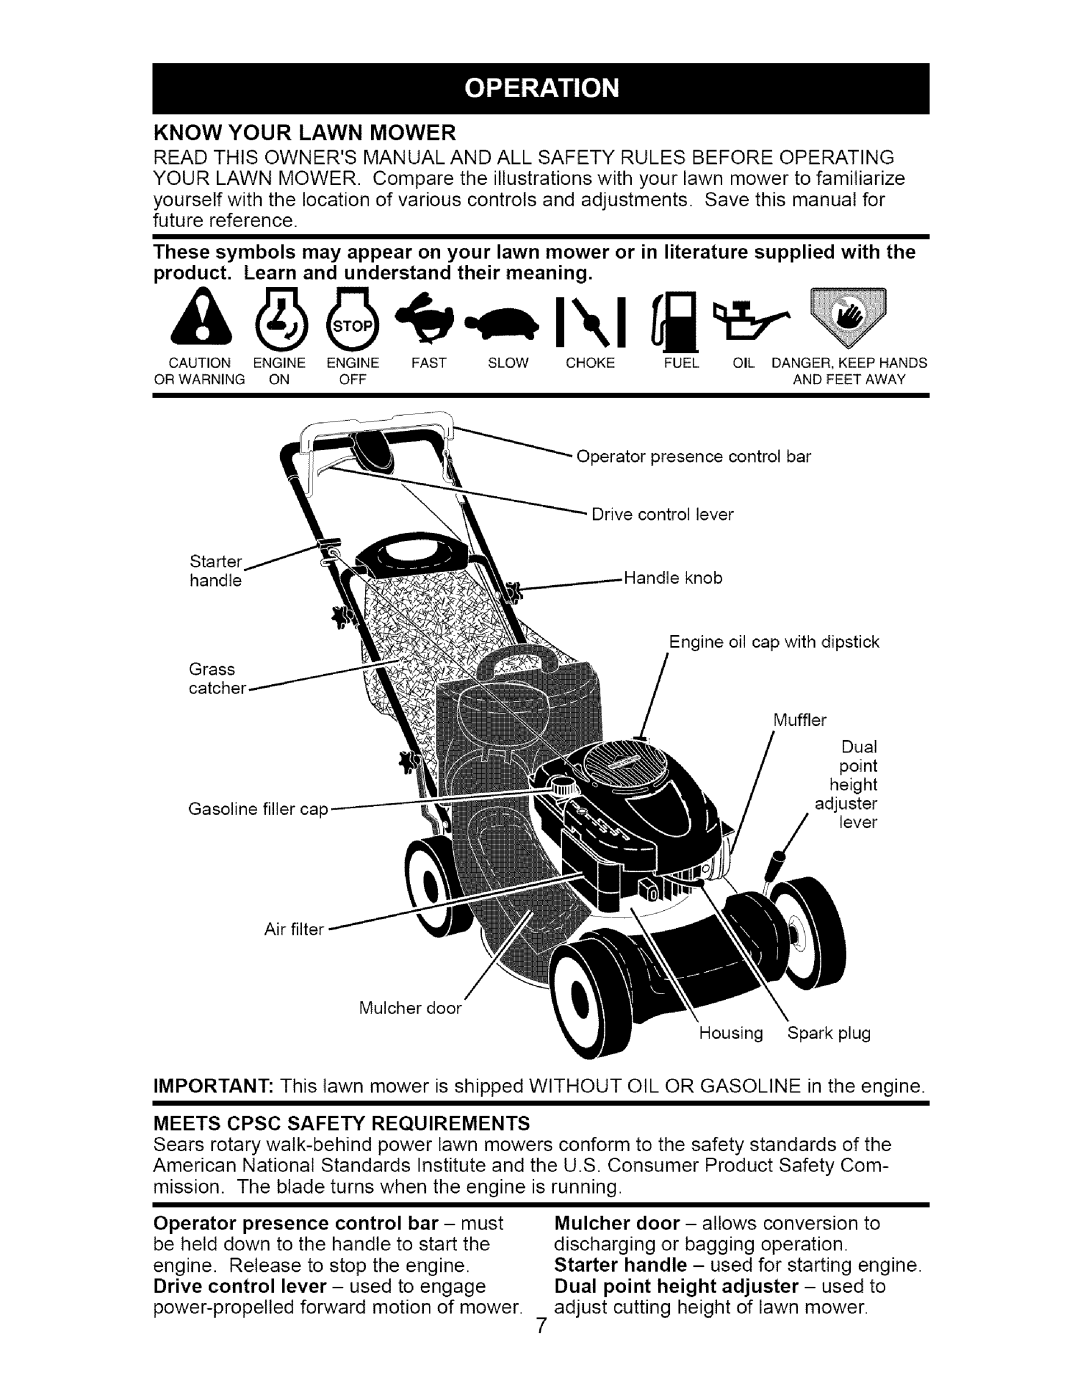 Craftsman 917.377011 Know Your Lawn Mower, product. Learn and understand their meaning, Meets Cpsc Safety Requirements 